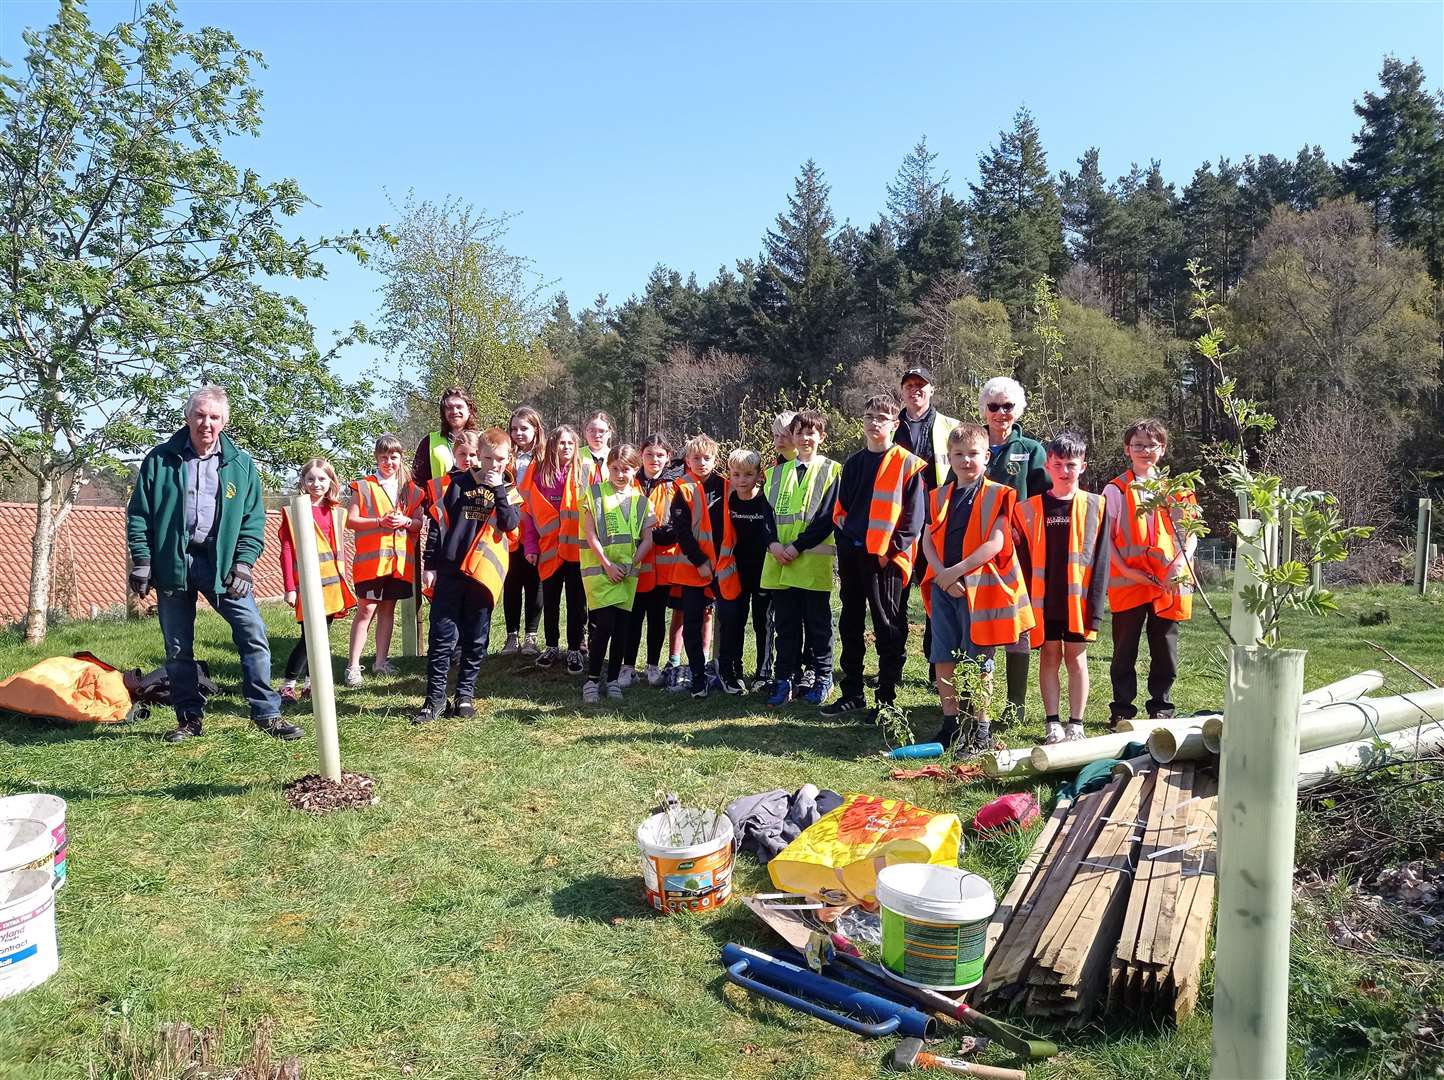 The Anderson’s P5/6 and Forres Community Woodlands Trust volunteers worked together for an afternoon.